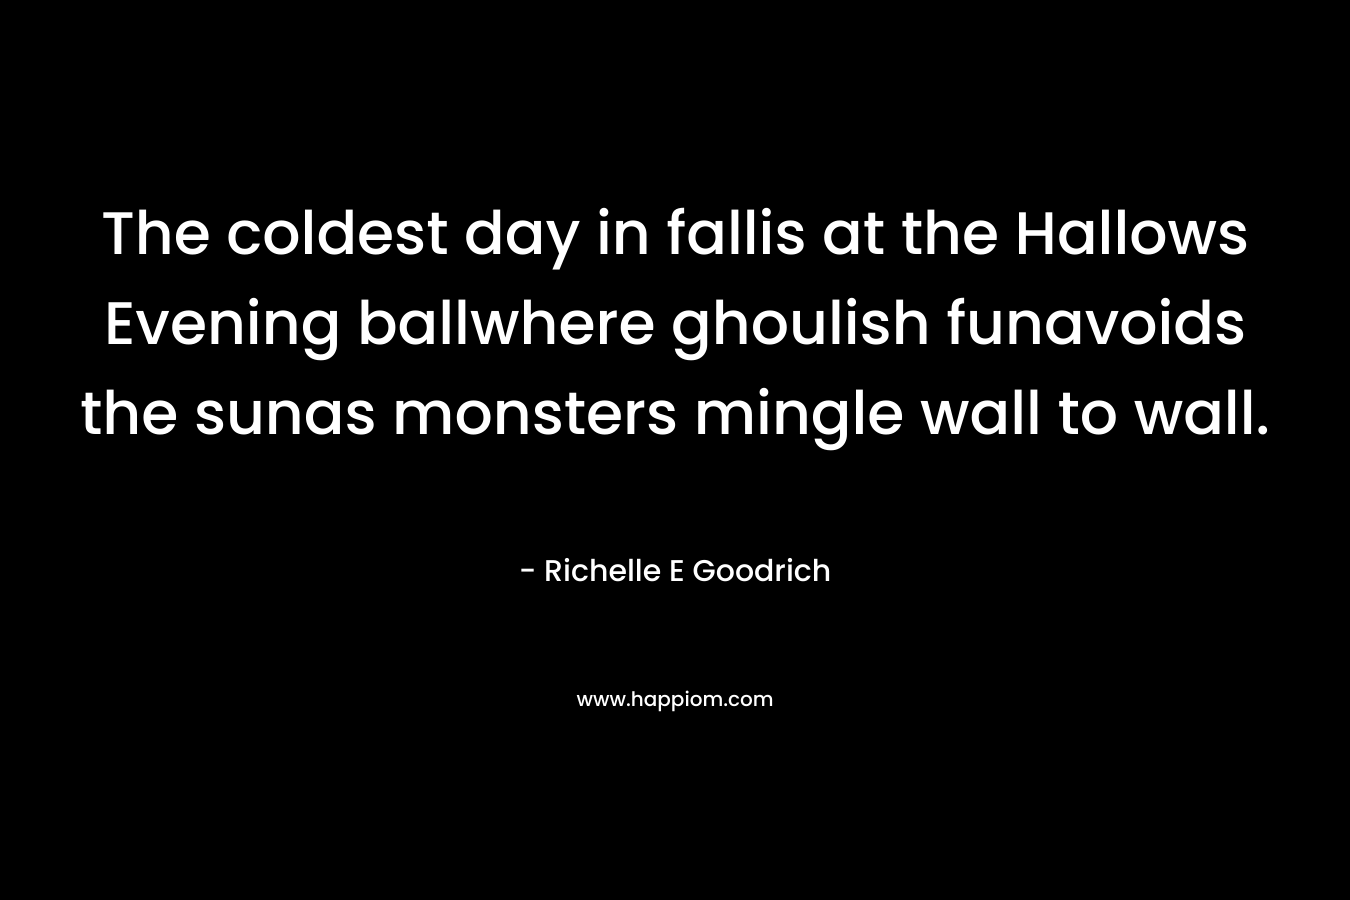 The coldest day in fallis at the Hallows Evening ballwhere ghoulish funavoids the sunas monsters mingle wall to wall.